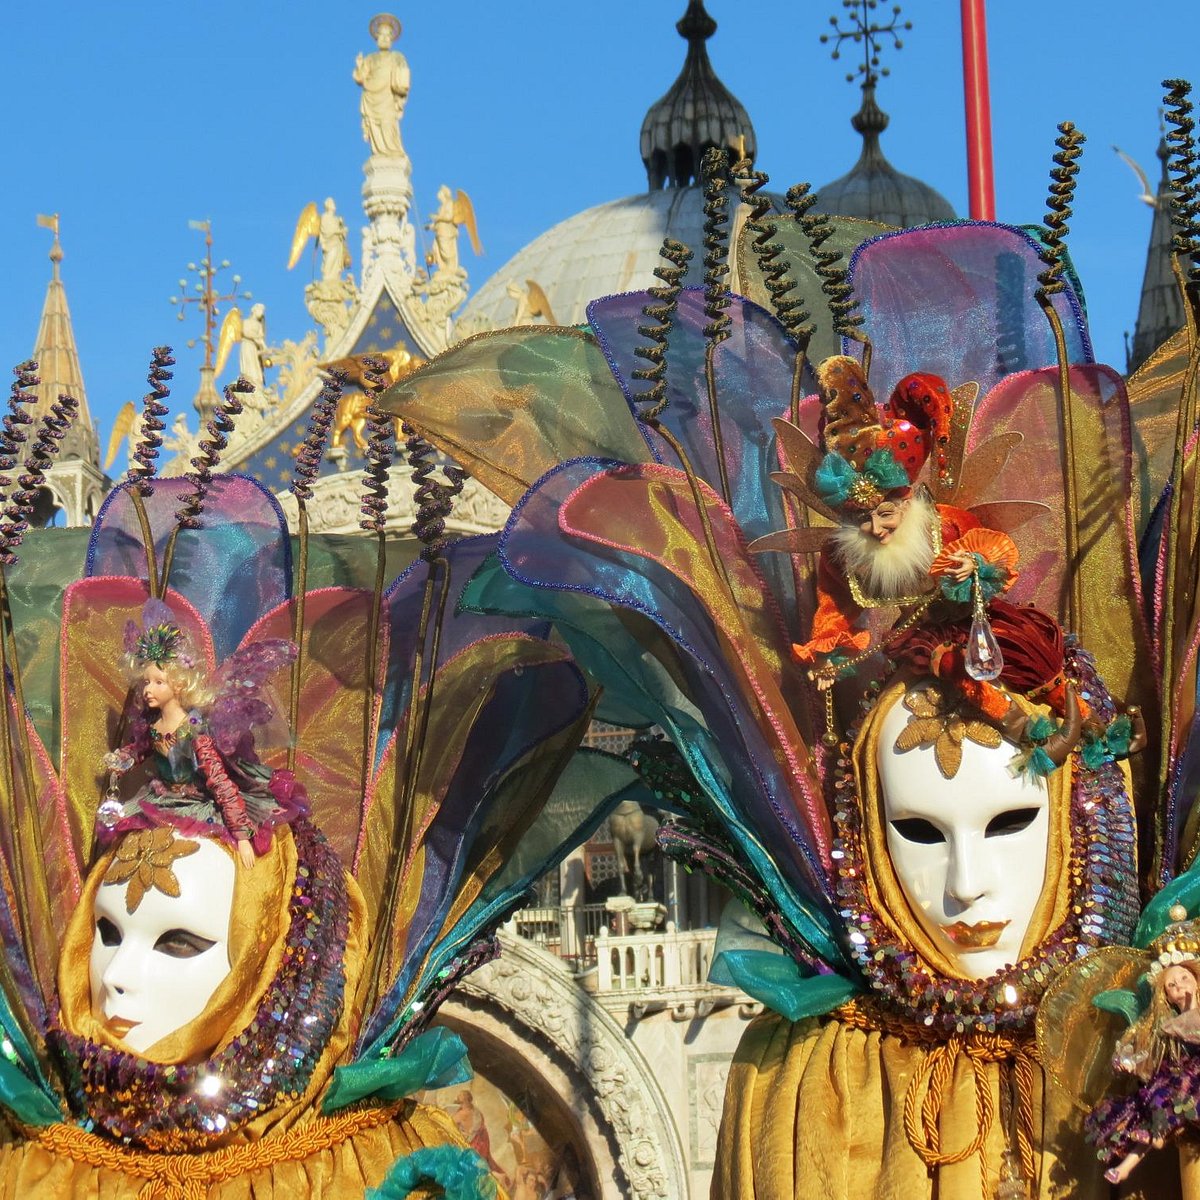 CARNIVAL OF VENICE: All You Need to Know BEFORE You Go (with Photos)